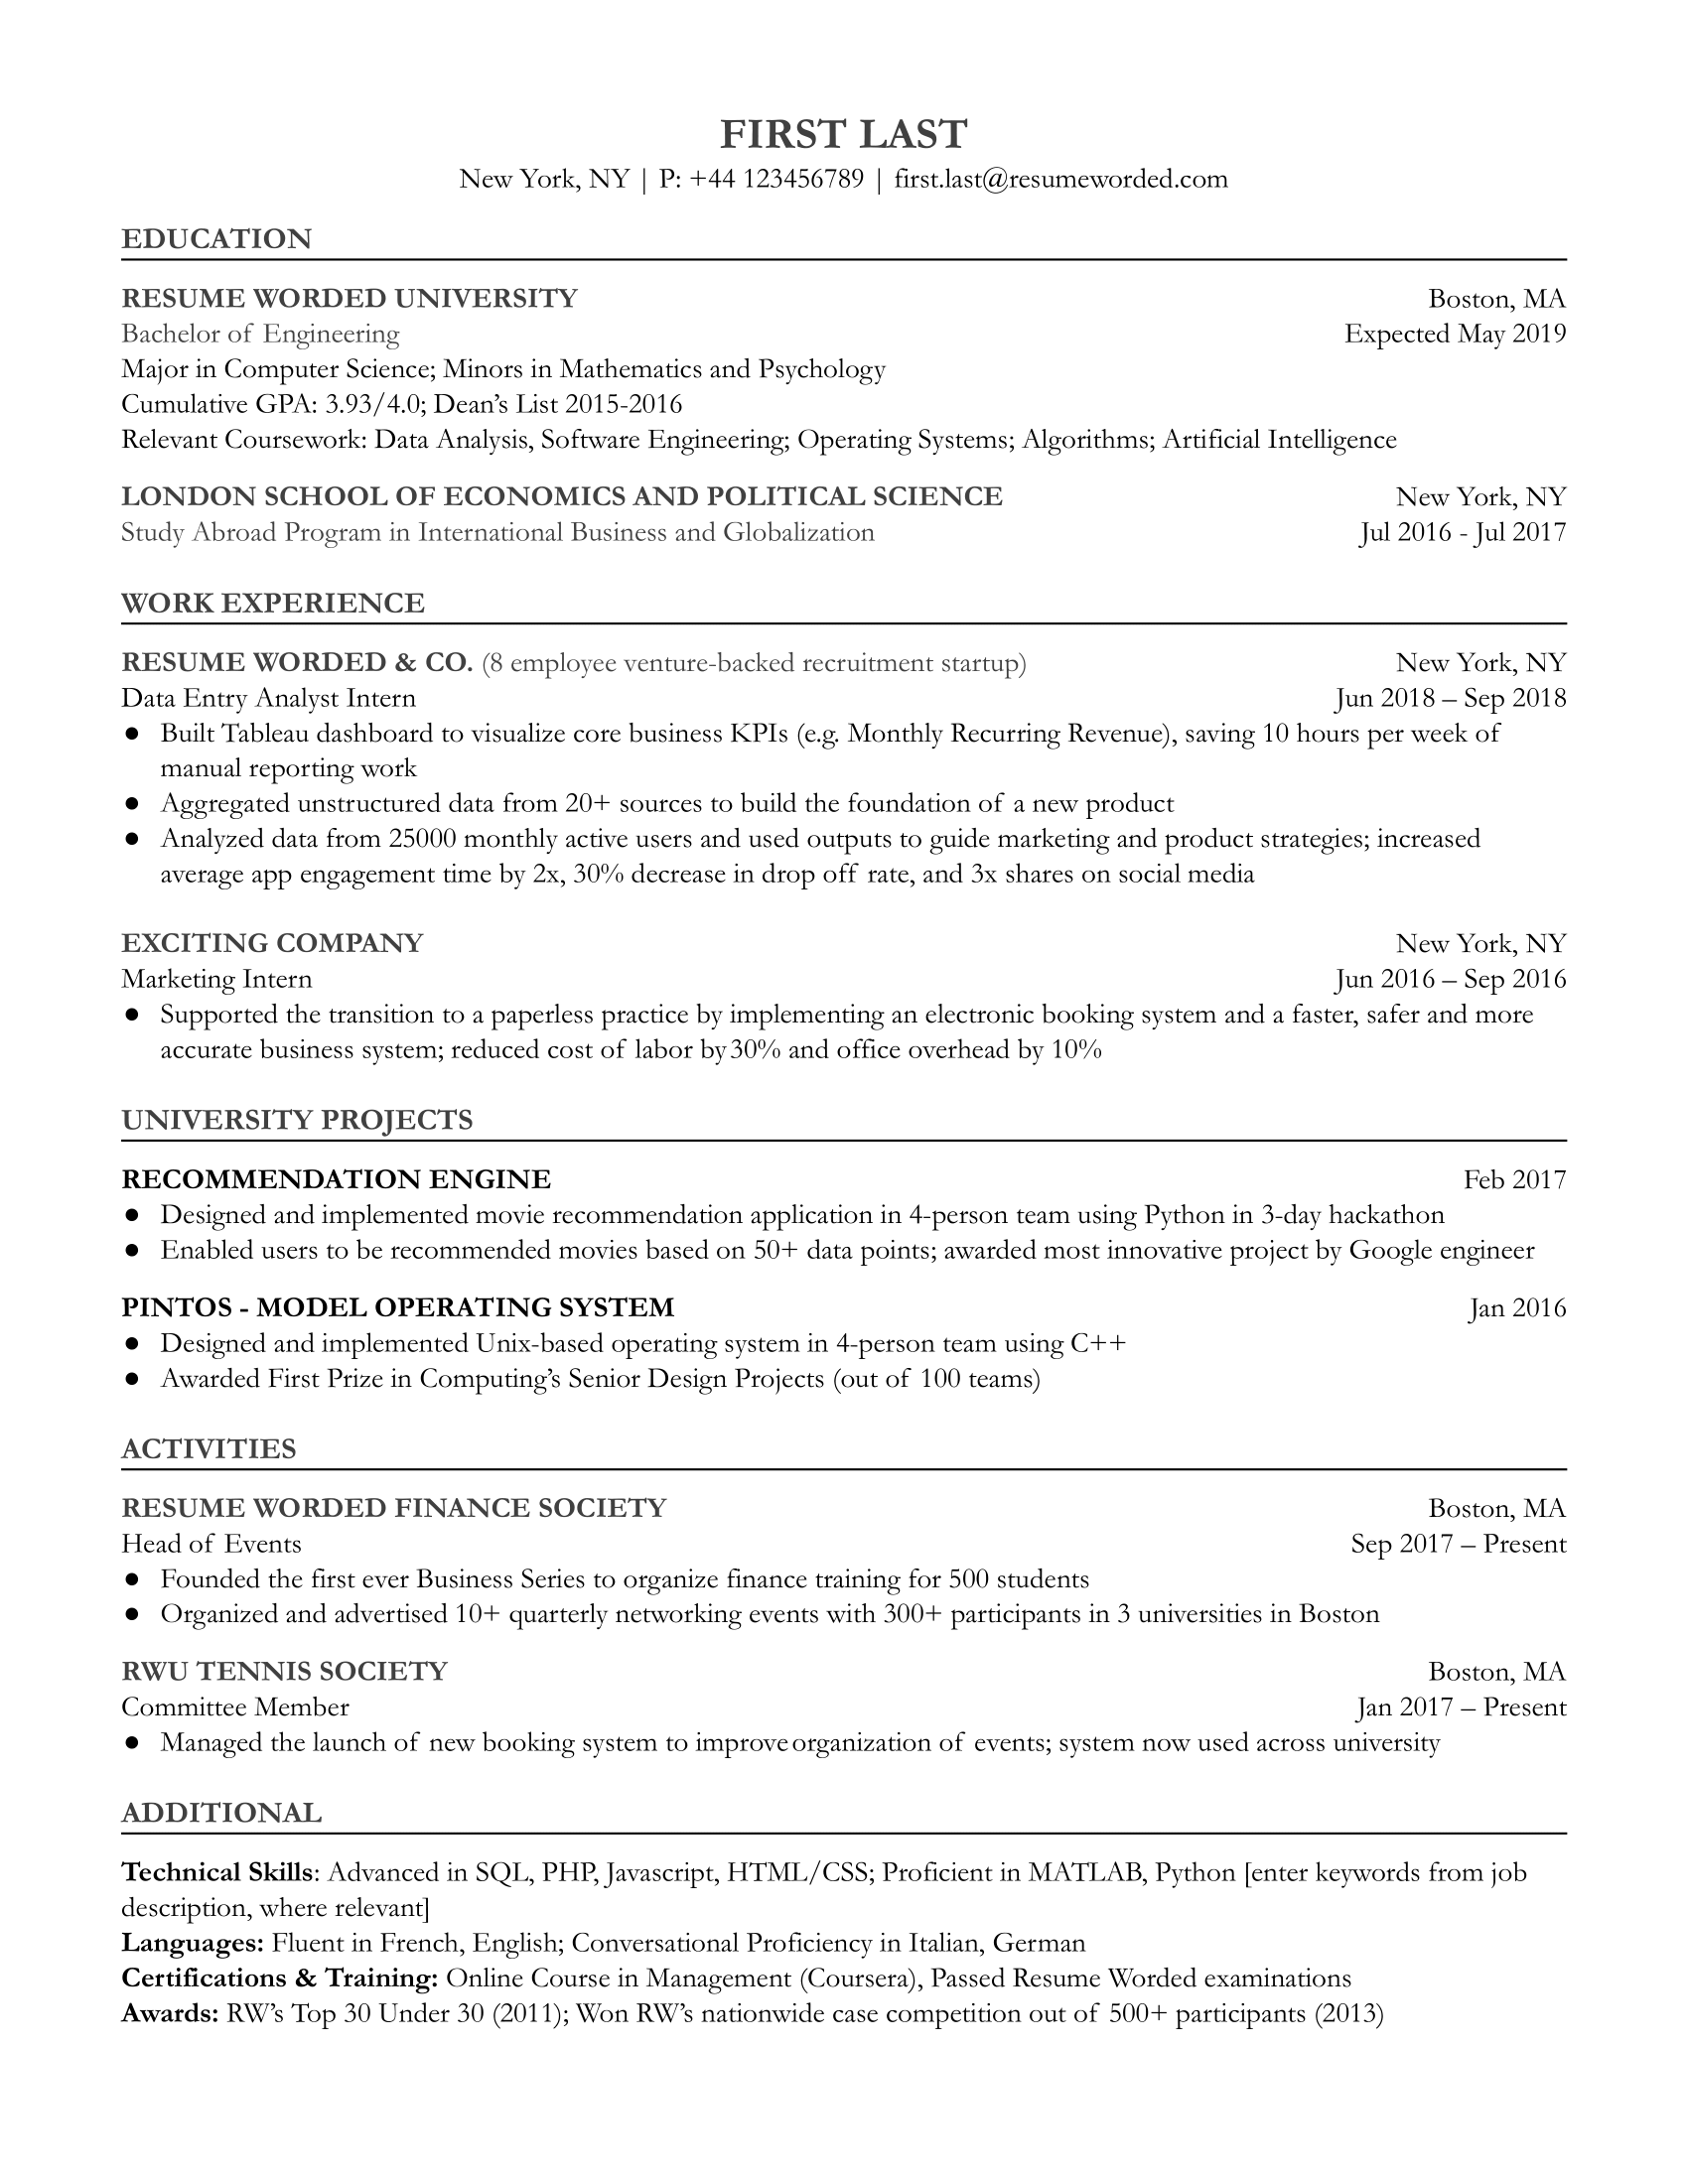 CV of an Entry Level Data Entry Analyst with focus on software skills and transferable abilities.